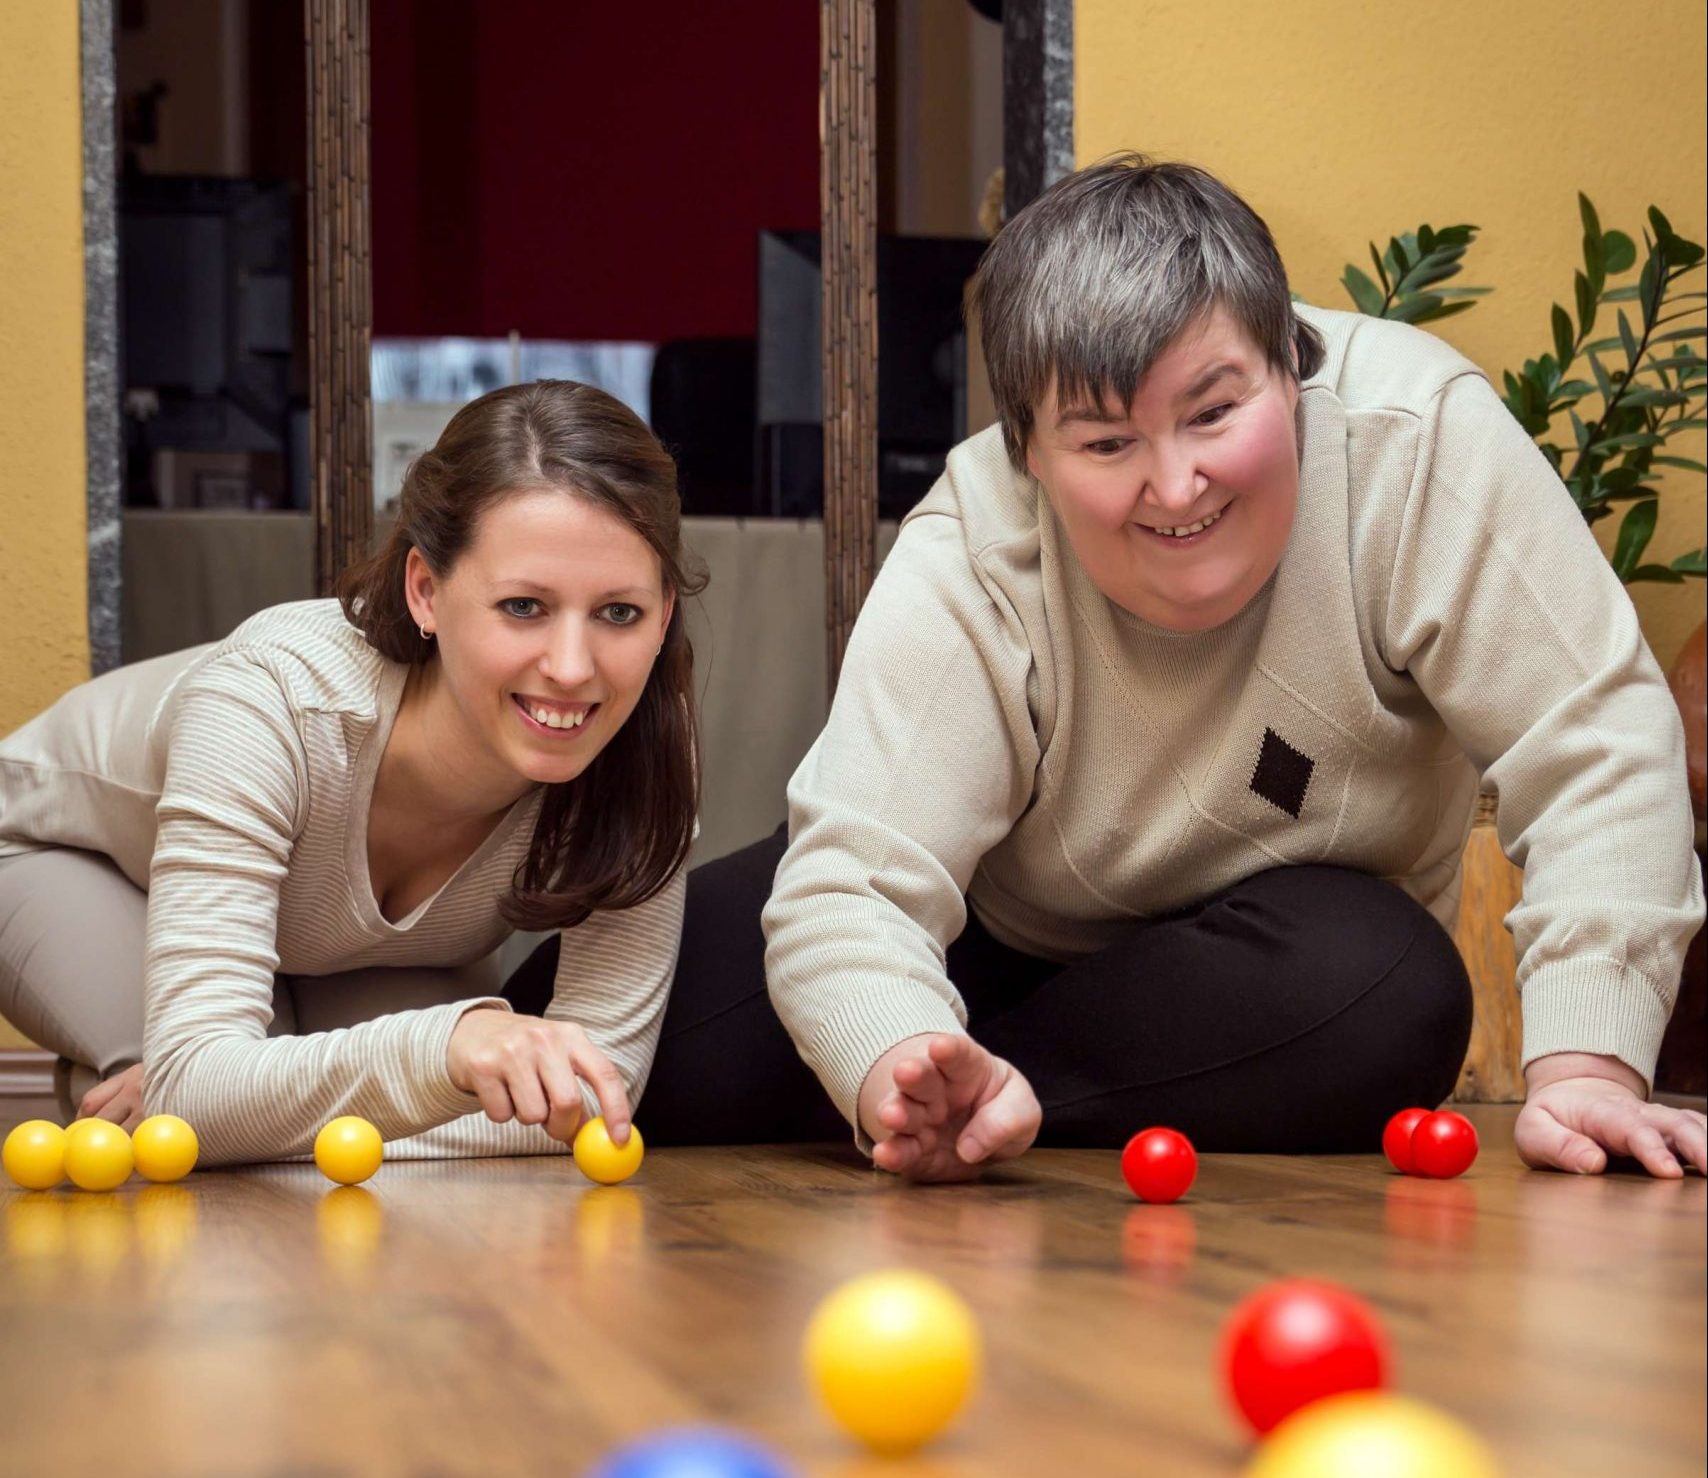 Woman with disability playing game with support worker